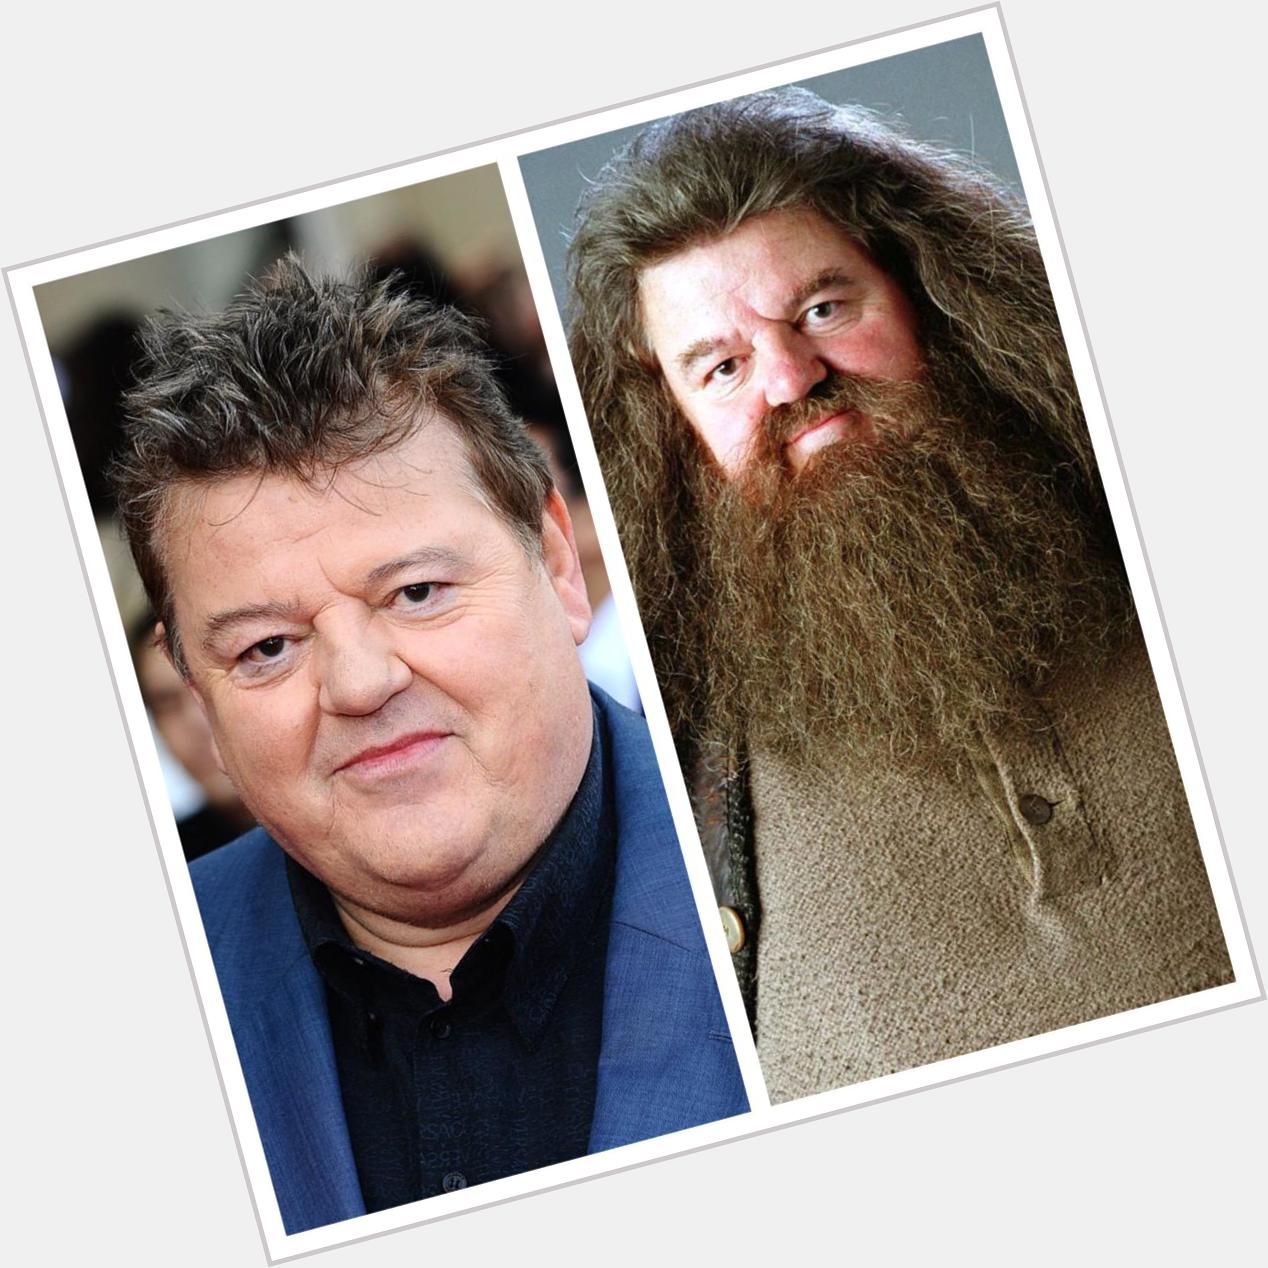 Mar. 30: Happy Birthday, Robbie Coltrane! He played our favorite half-giant, Rubeus Hagrid, in the films 